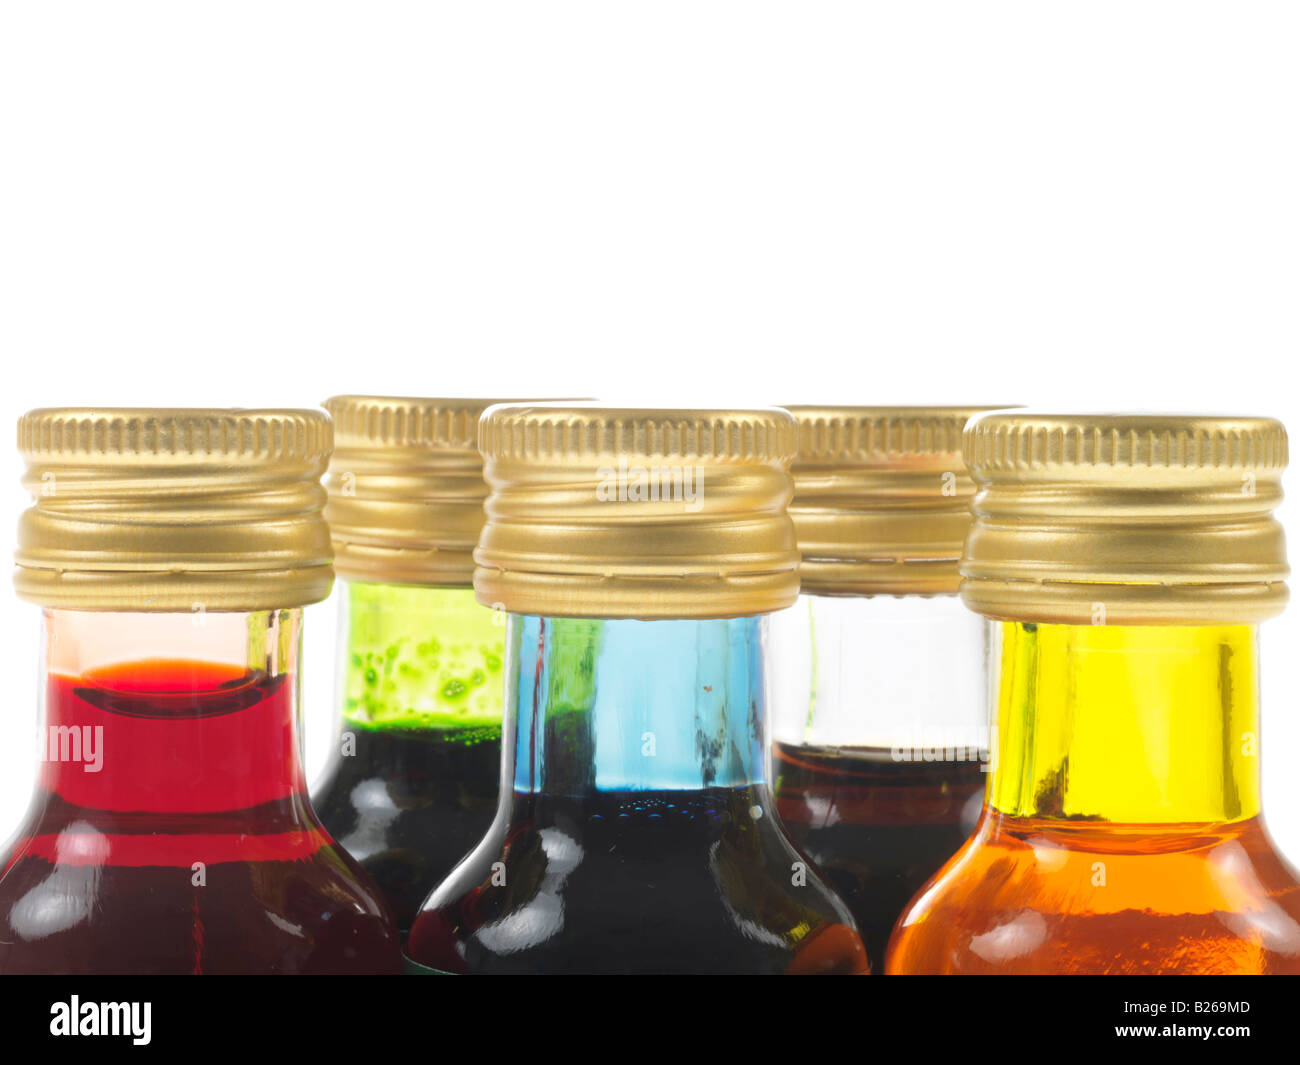 4 Bottles Of Food Coloring Isolated On White Background Stock Photo -  Download Image Now - iStock